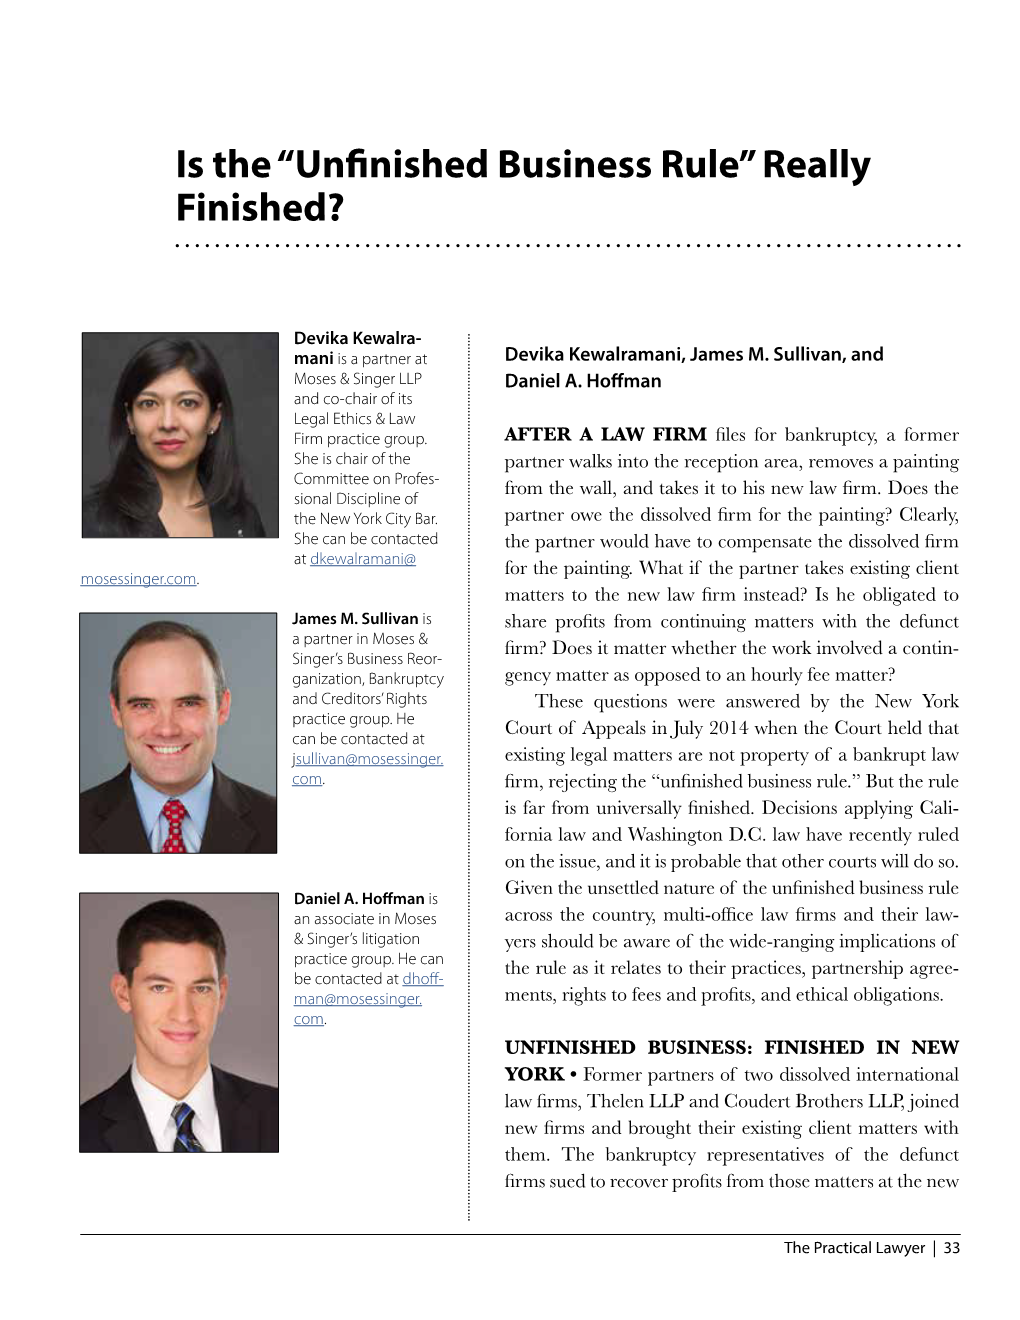 Is the “Unfinished Business Rule” Really Finished?